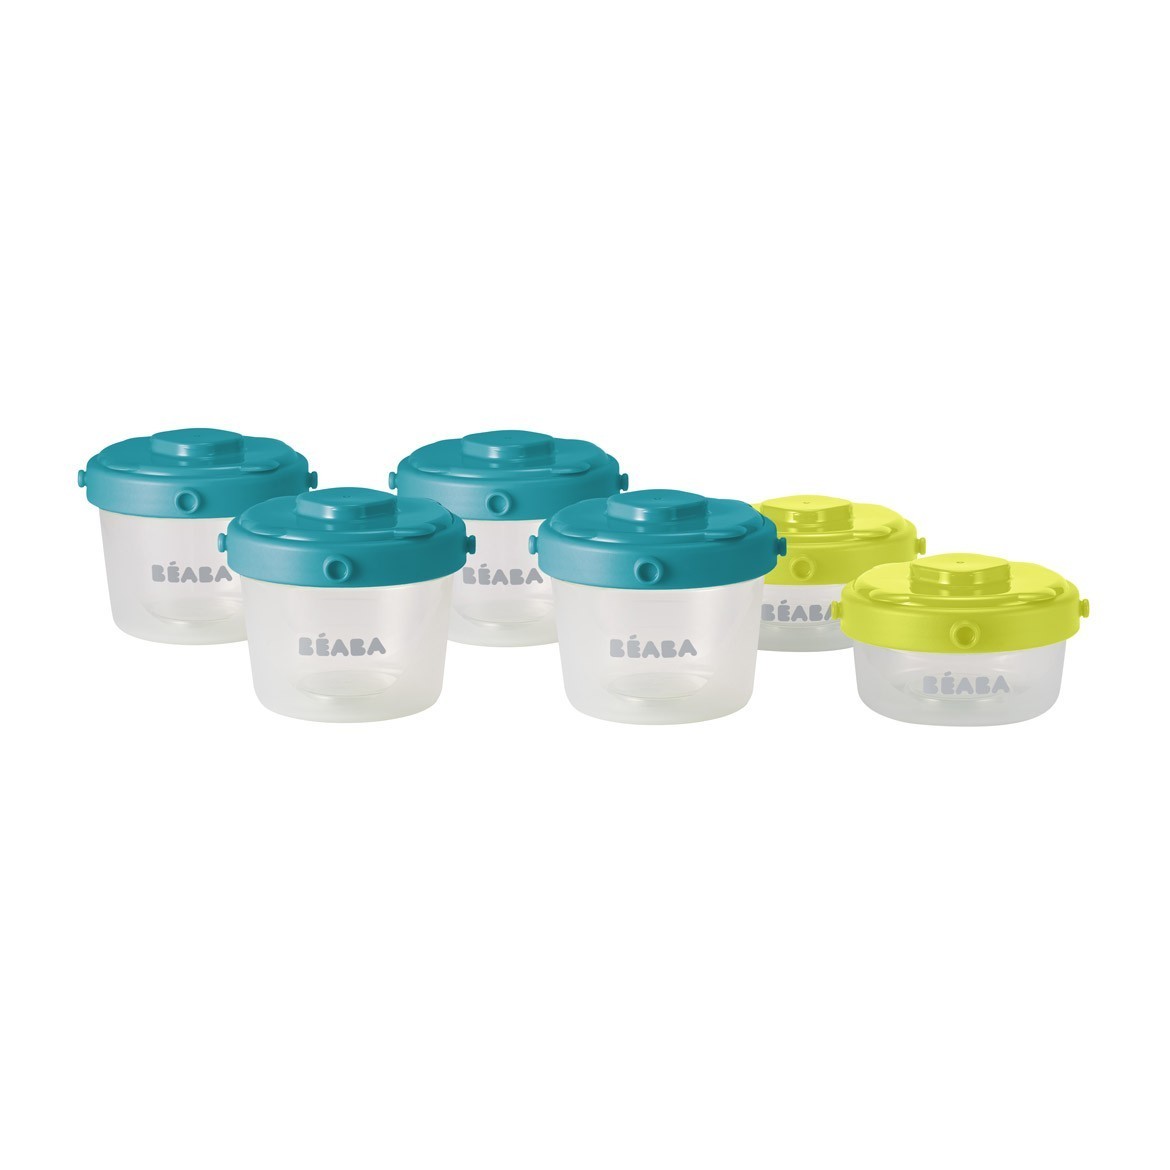 Beaba MultiPortions Silicone 6x90ml Neon : Next Day Delivery